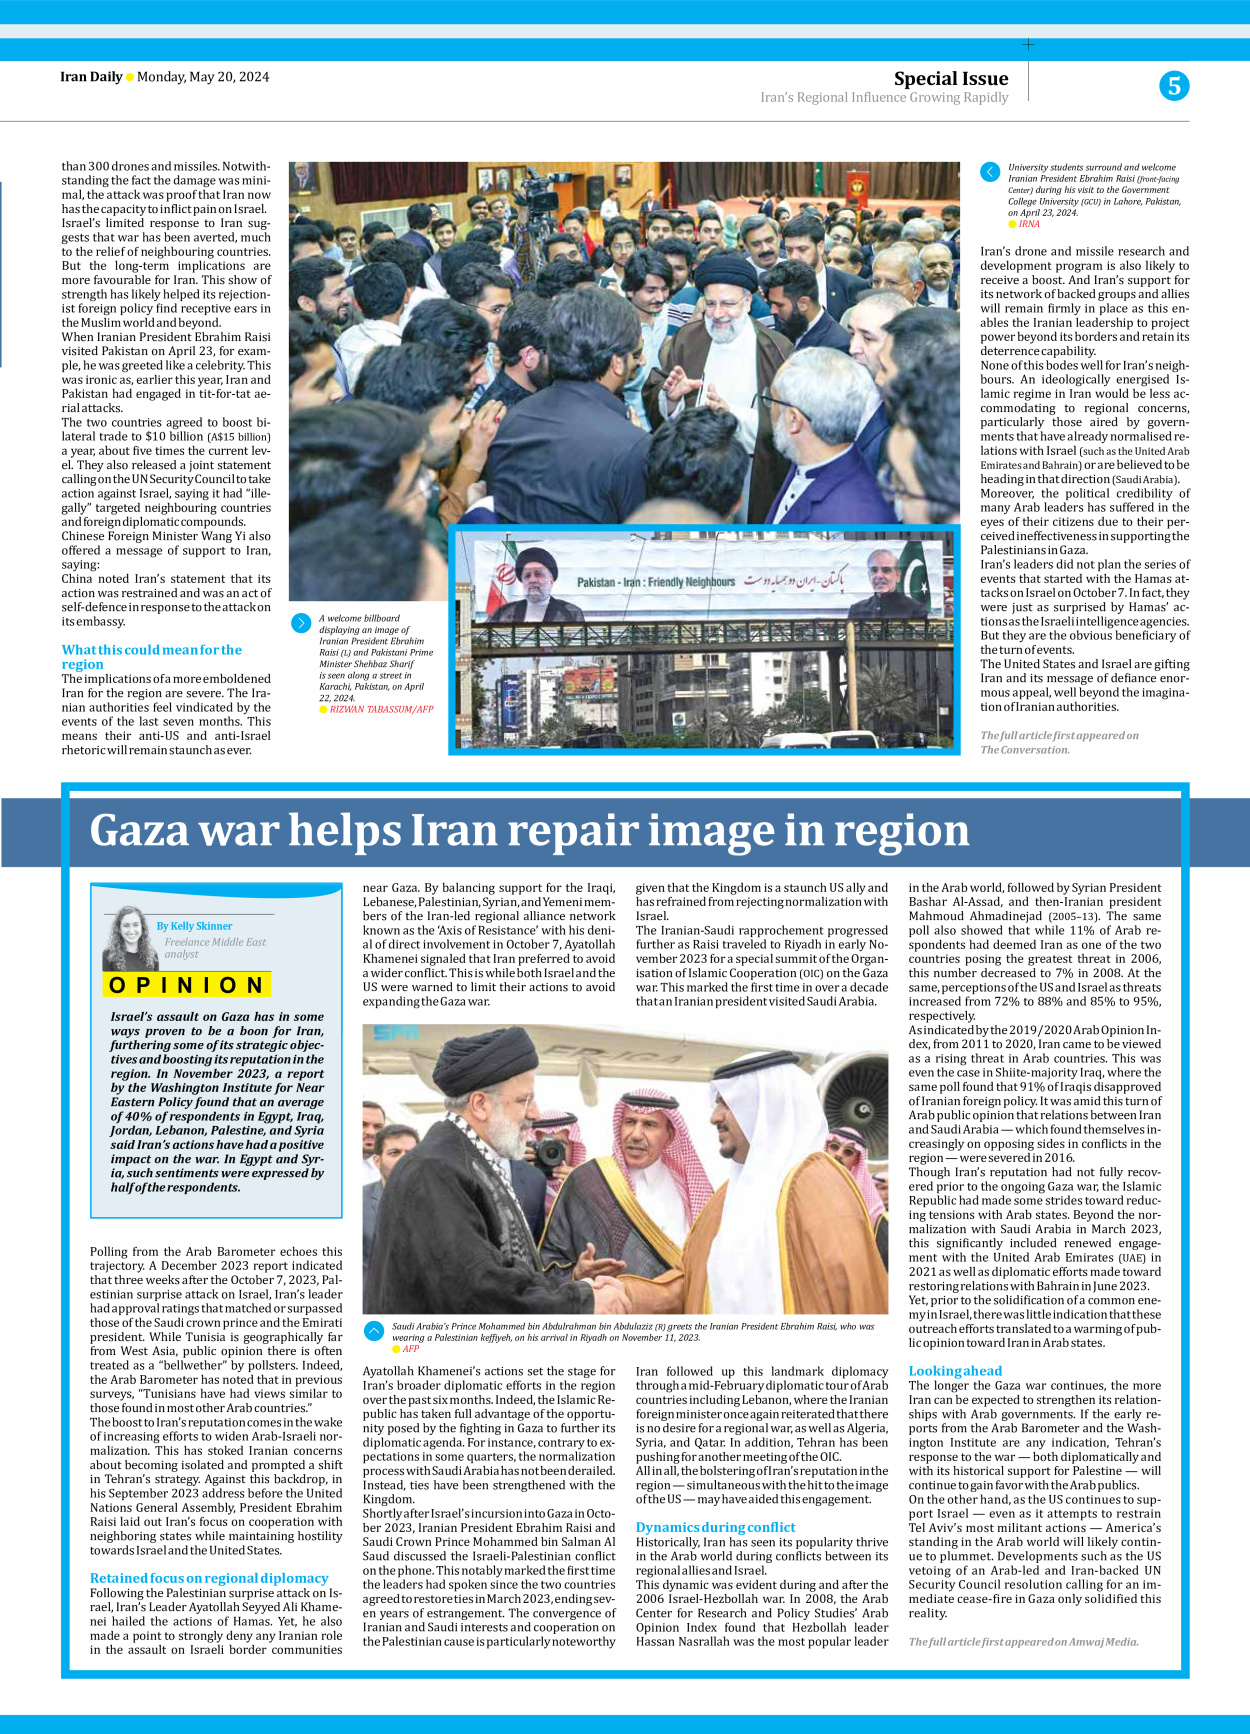 Iran Daily - Number Seven Thousand Five Hundred and Sixty Two - 19 May 2024 - Page 5